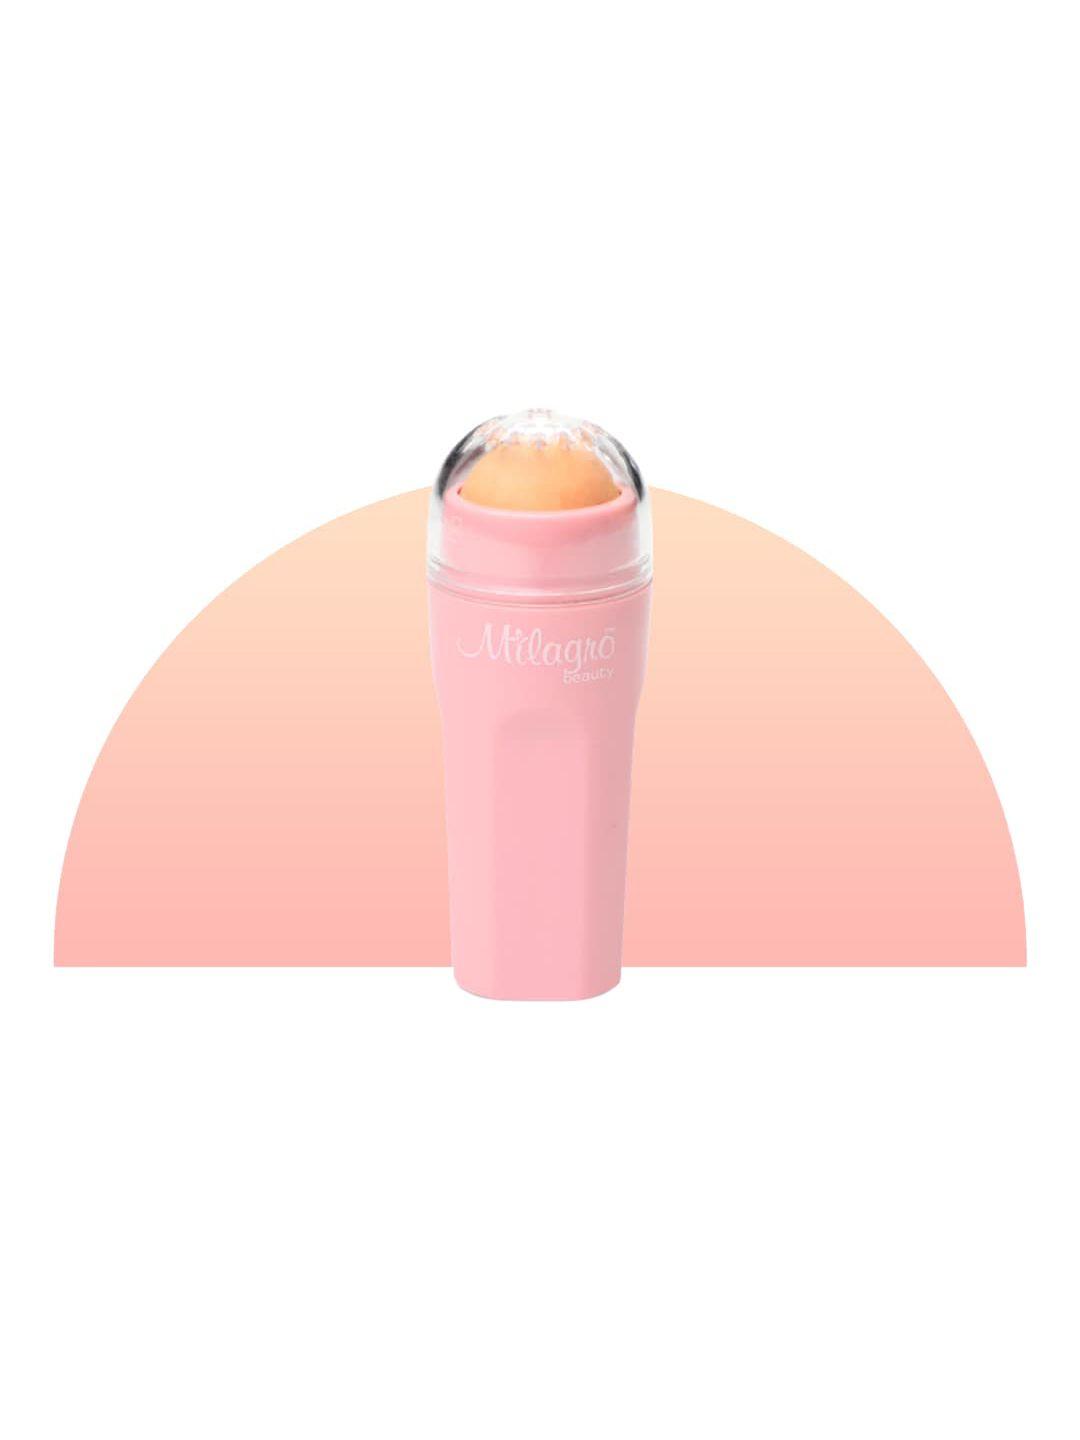 milagro beauty beauty oil absorbing reusable volcanic face roller - pink